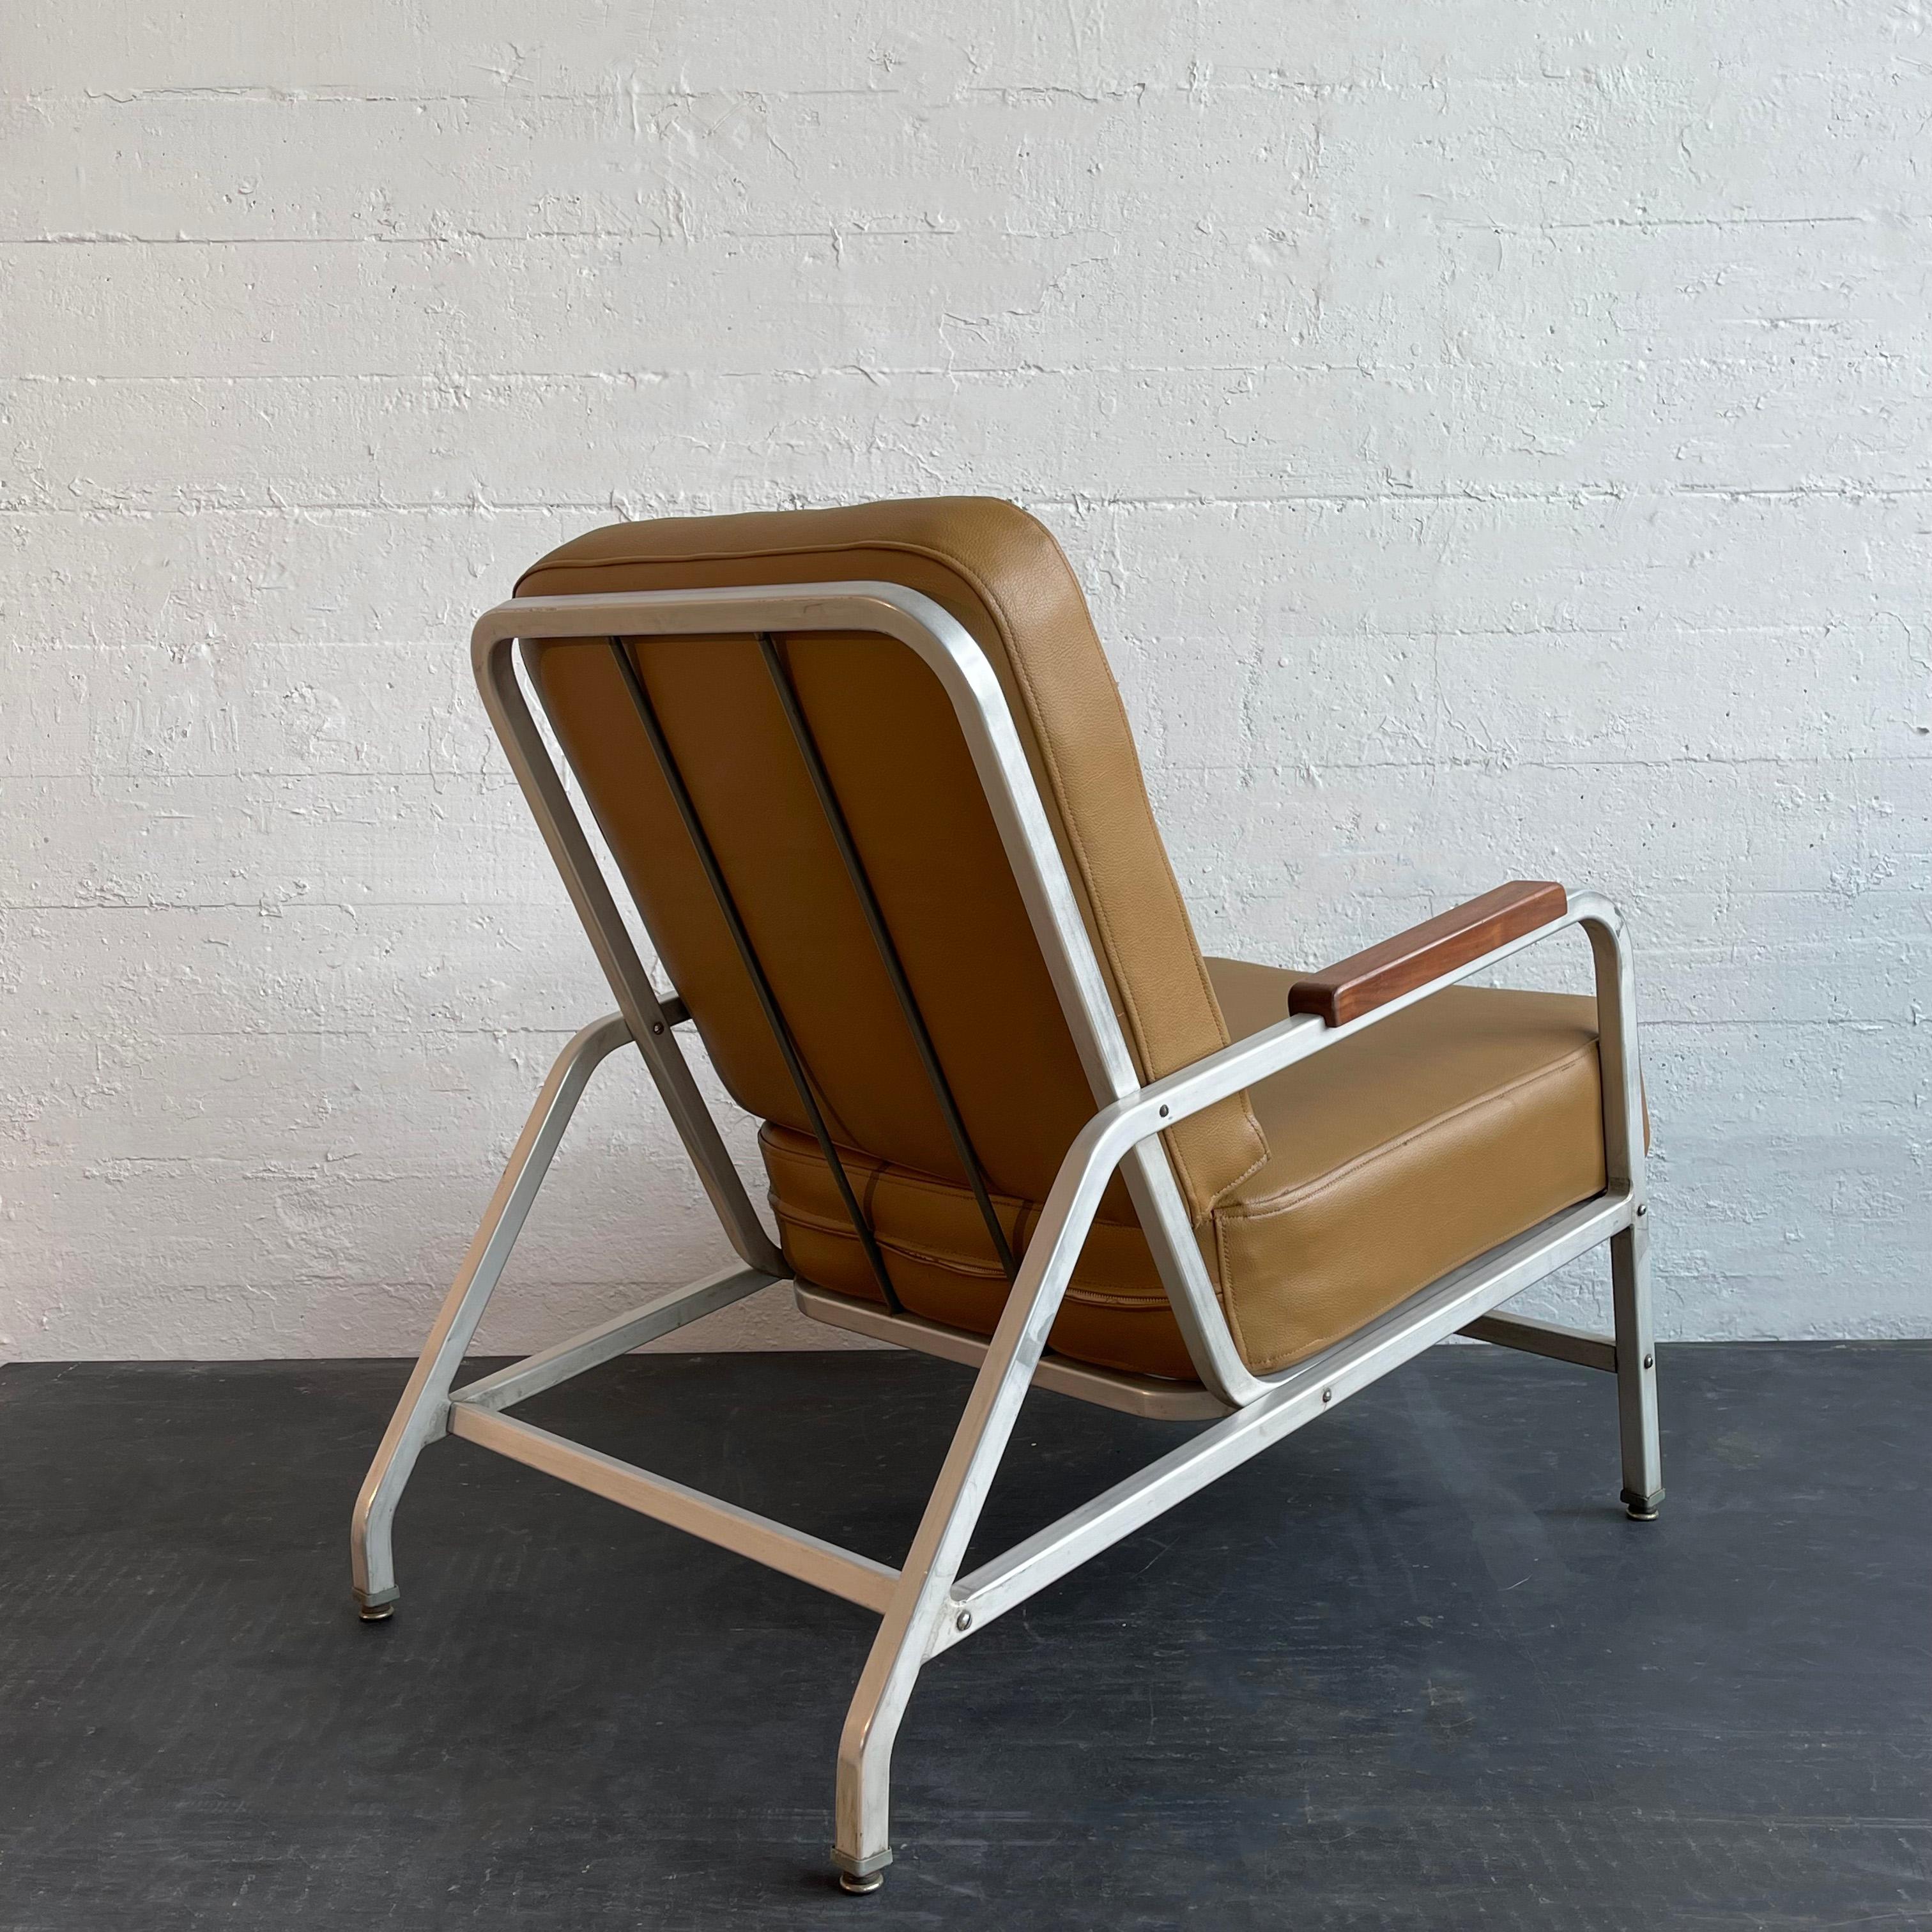 Machine-Age Mid-Century Aluminum Lounge Chair In Good Condition For Sale In Brooklyn, NY